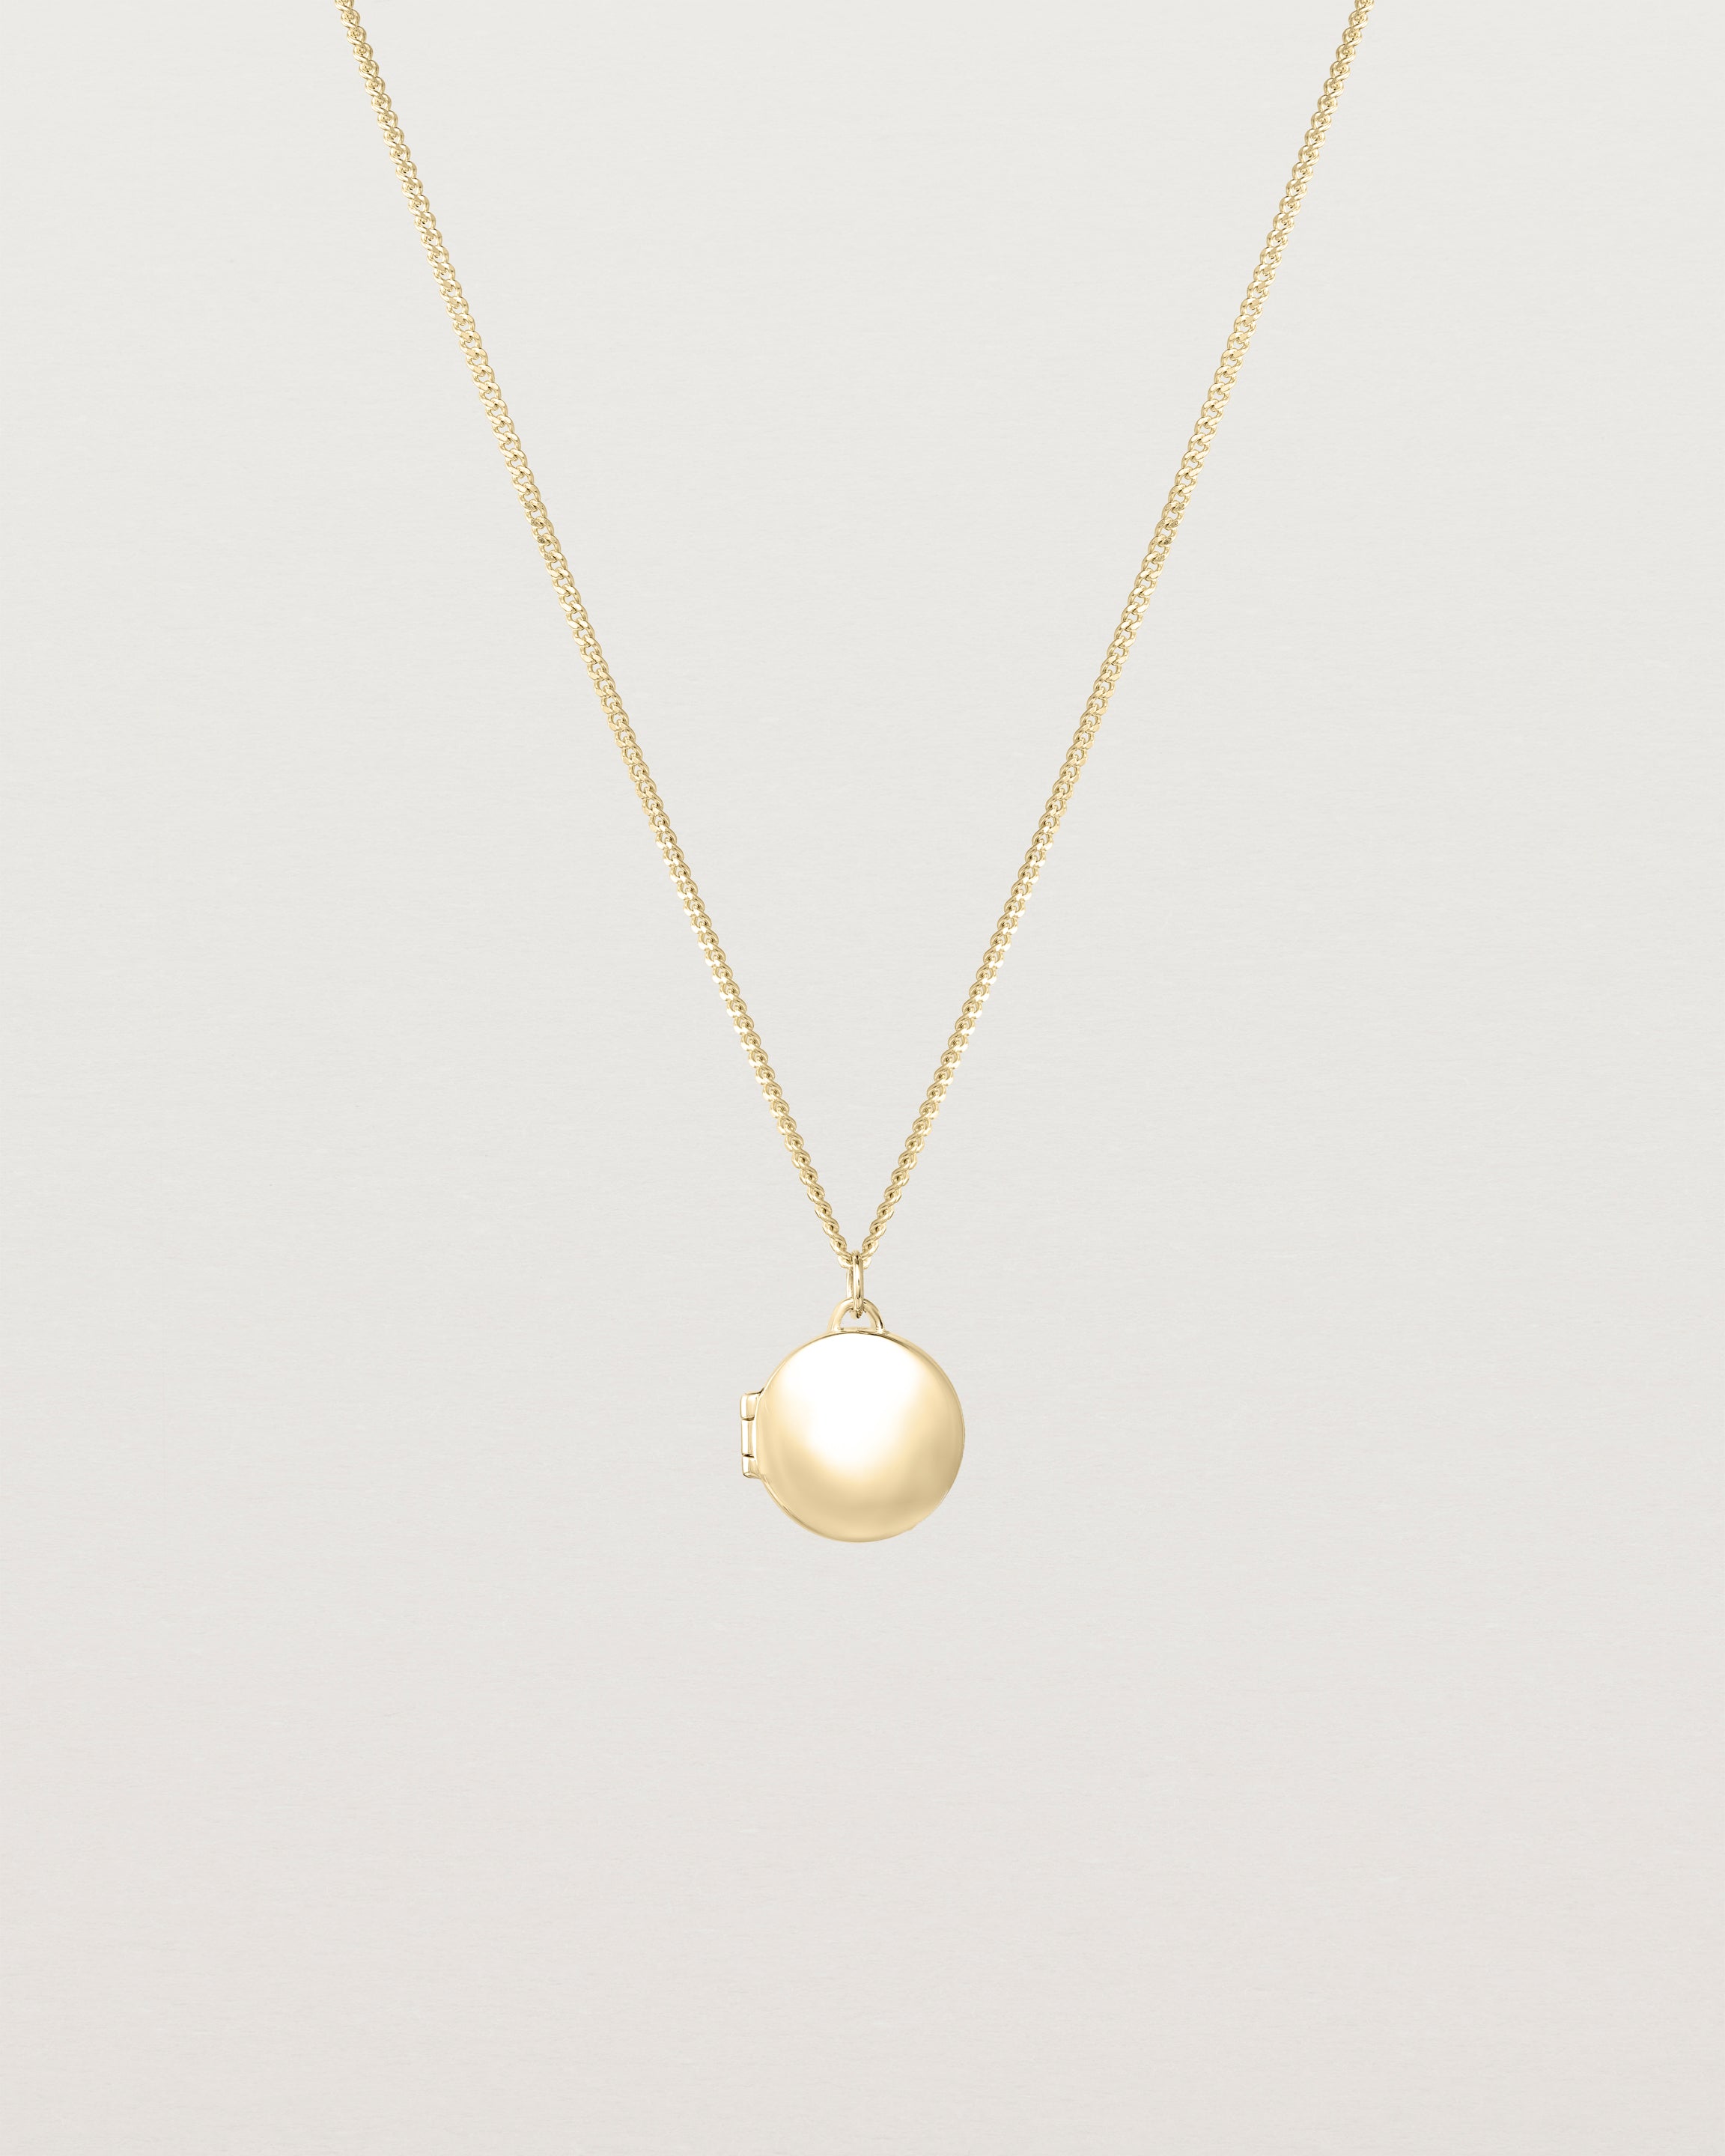 Front view of the Signature Locket in yellow gold.